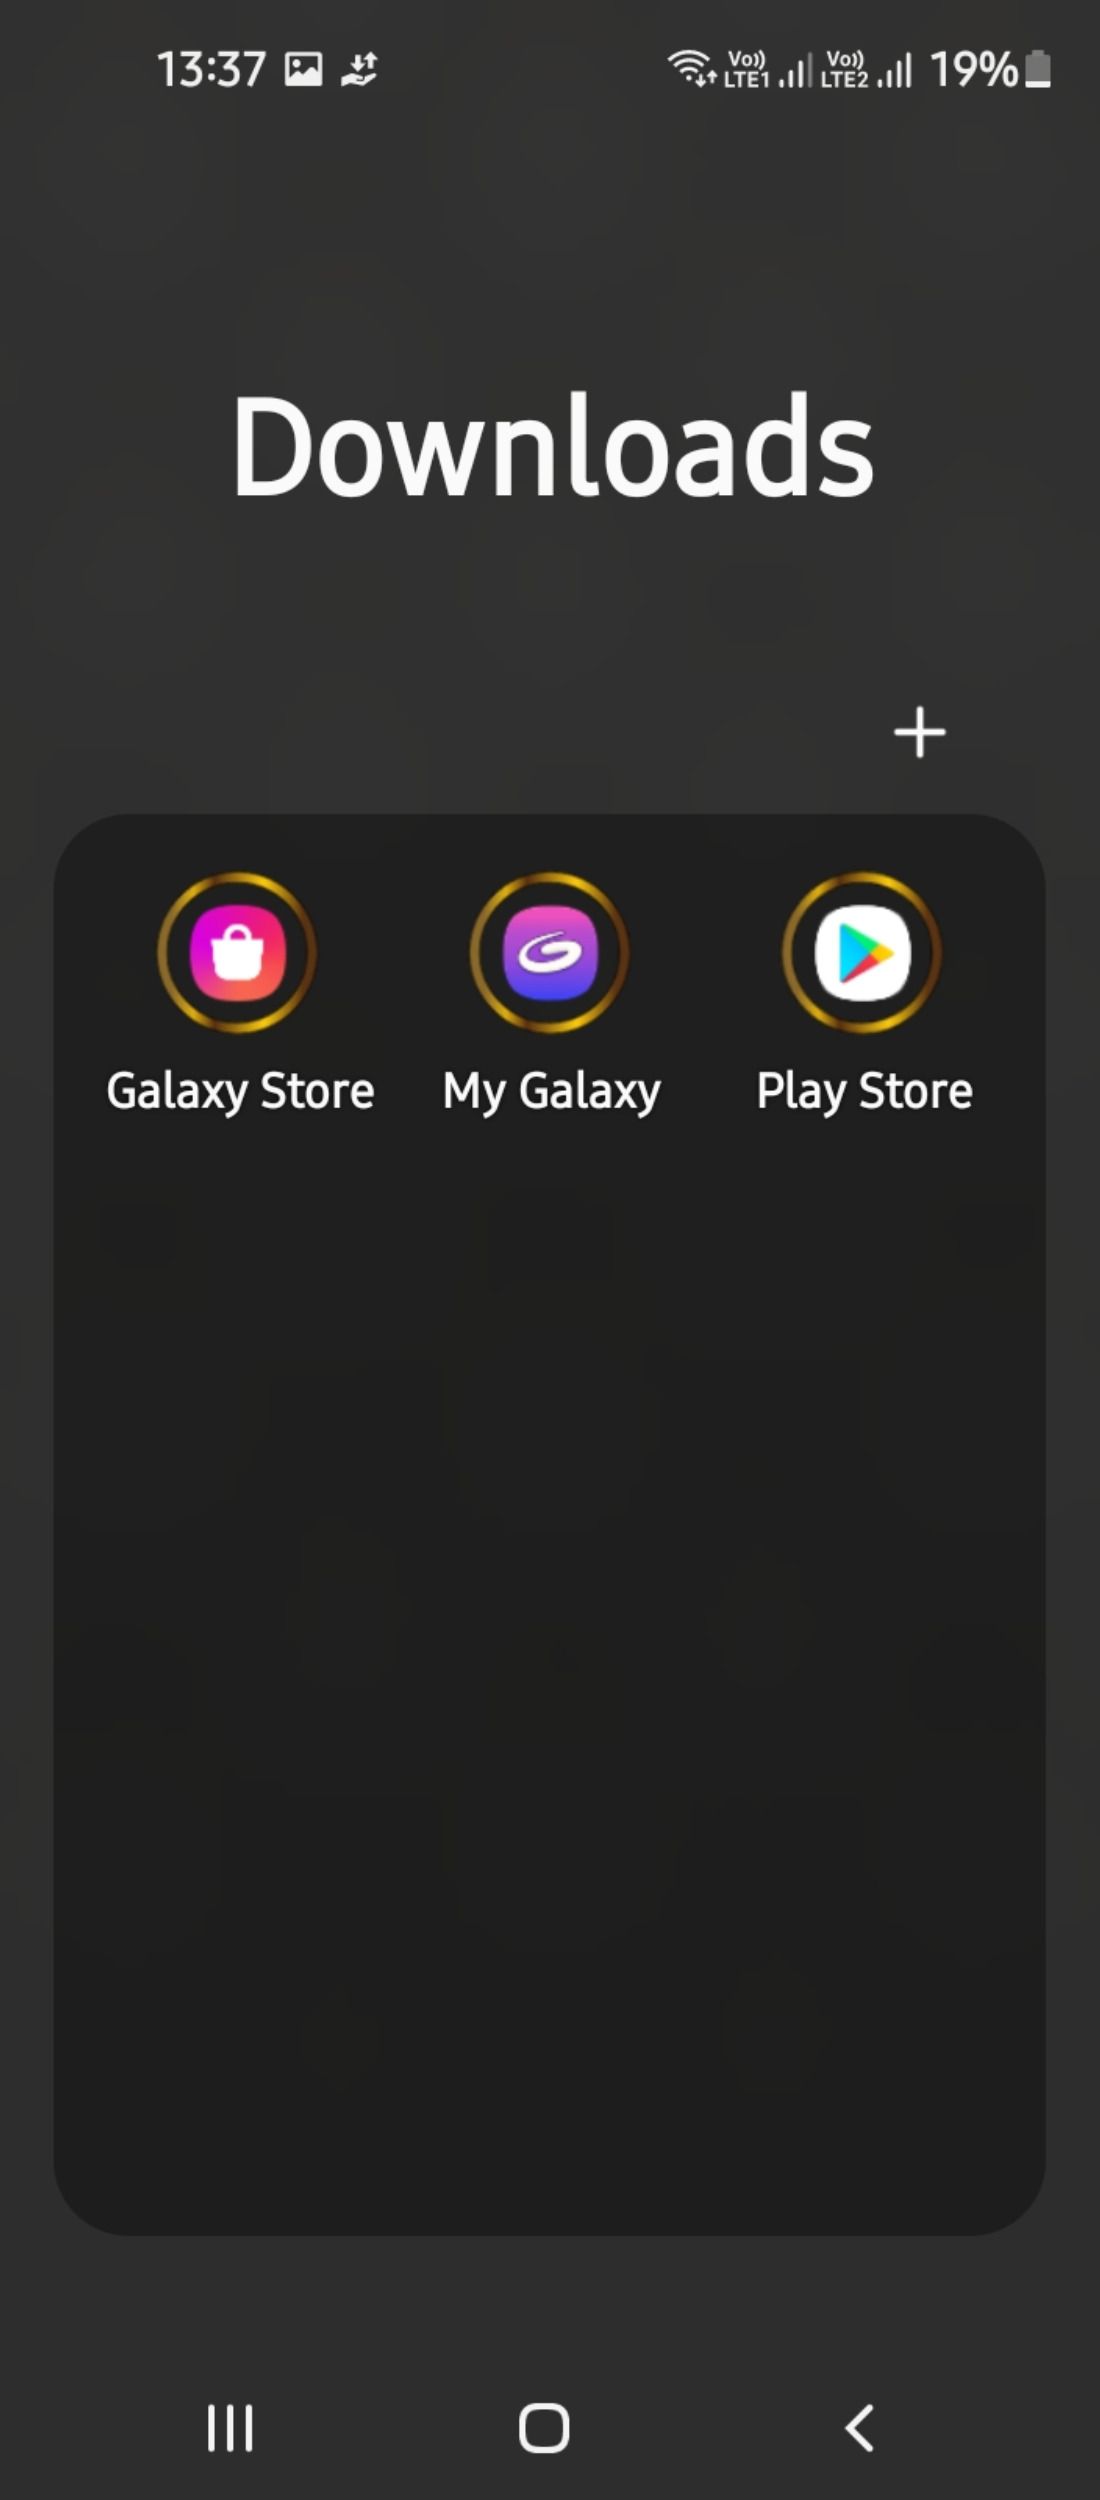 Functional categorization of apps on Samsung Galaxy